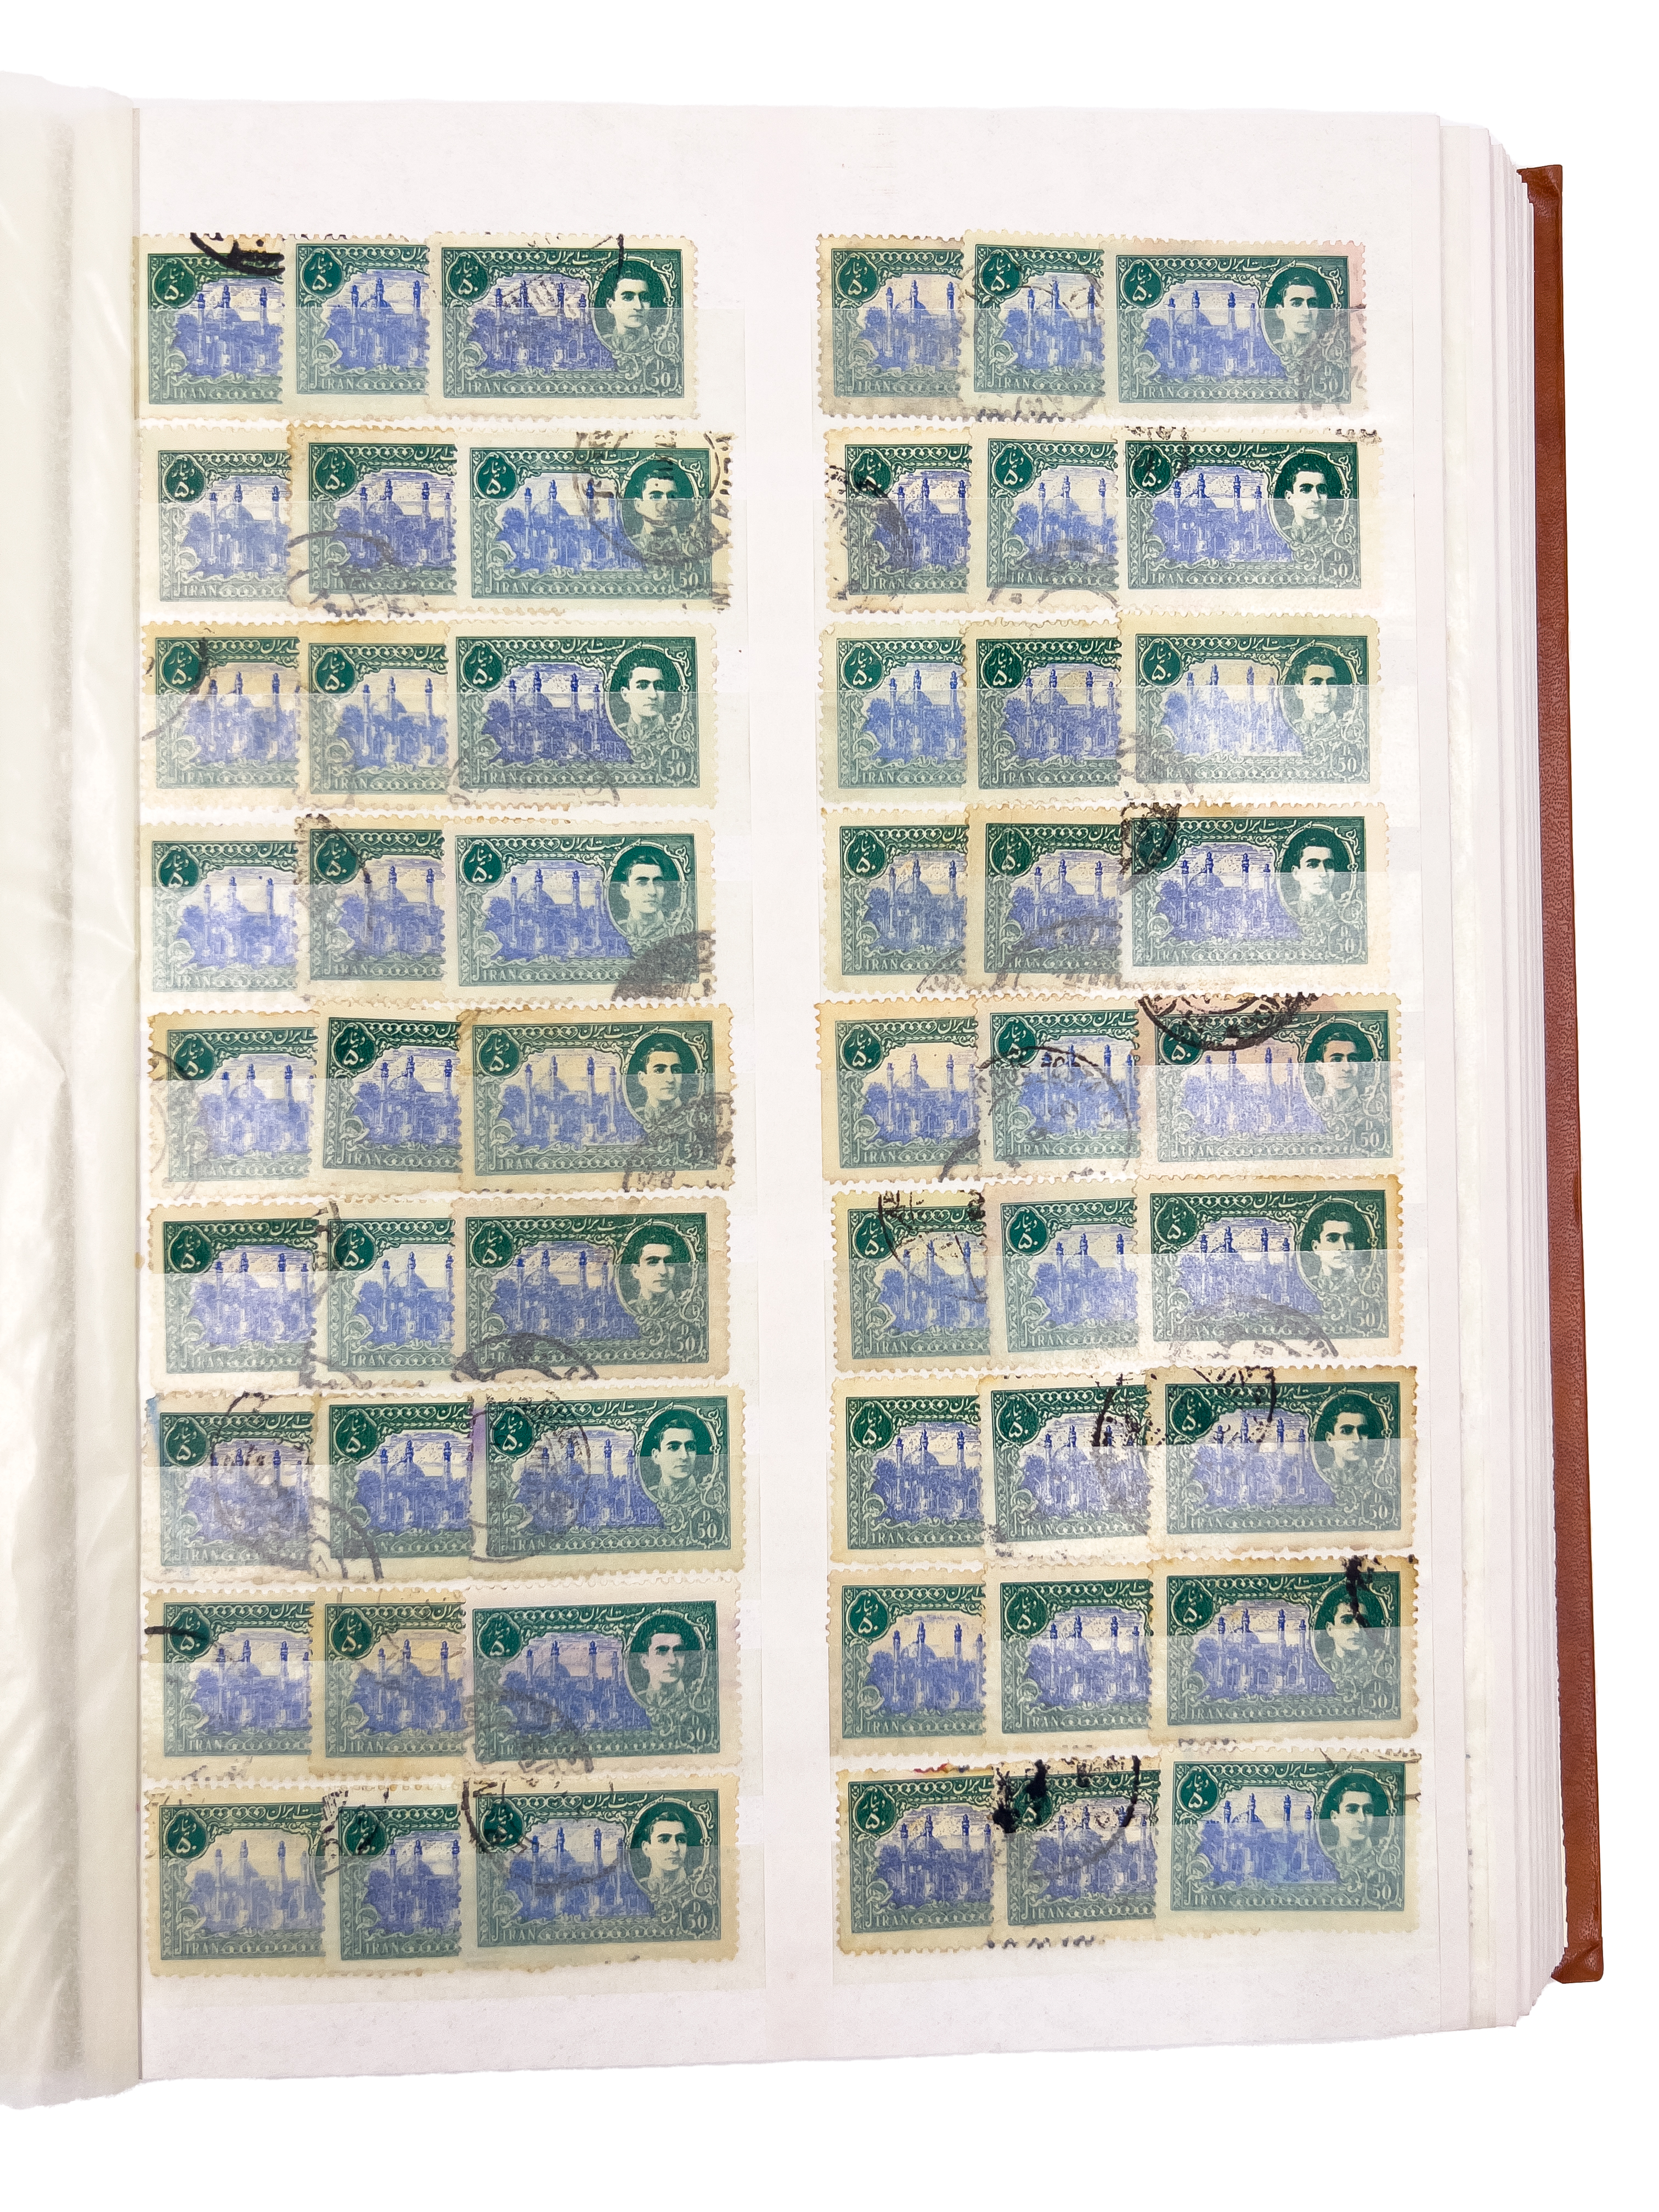 RARE & EXTENSIVE COLLECTION OF PERSIAN PAHLAVI POST STAMPS - Image 38 of 63